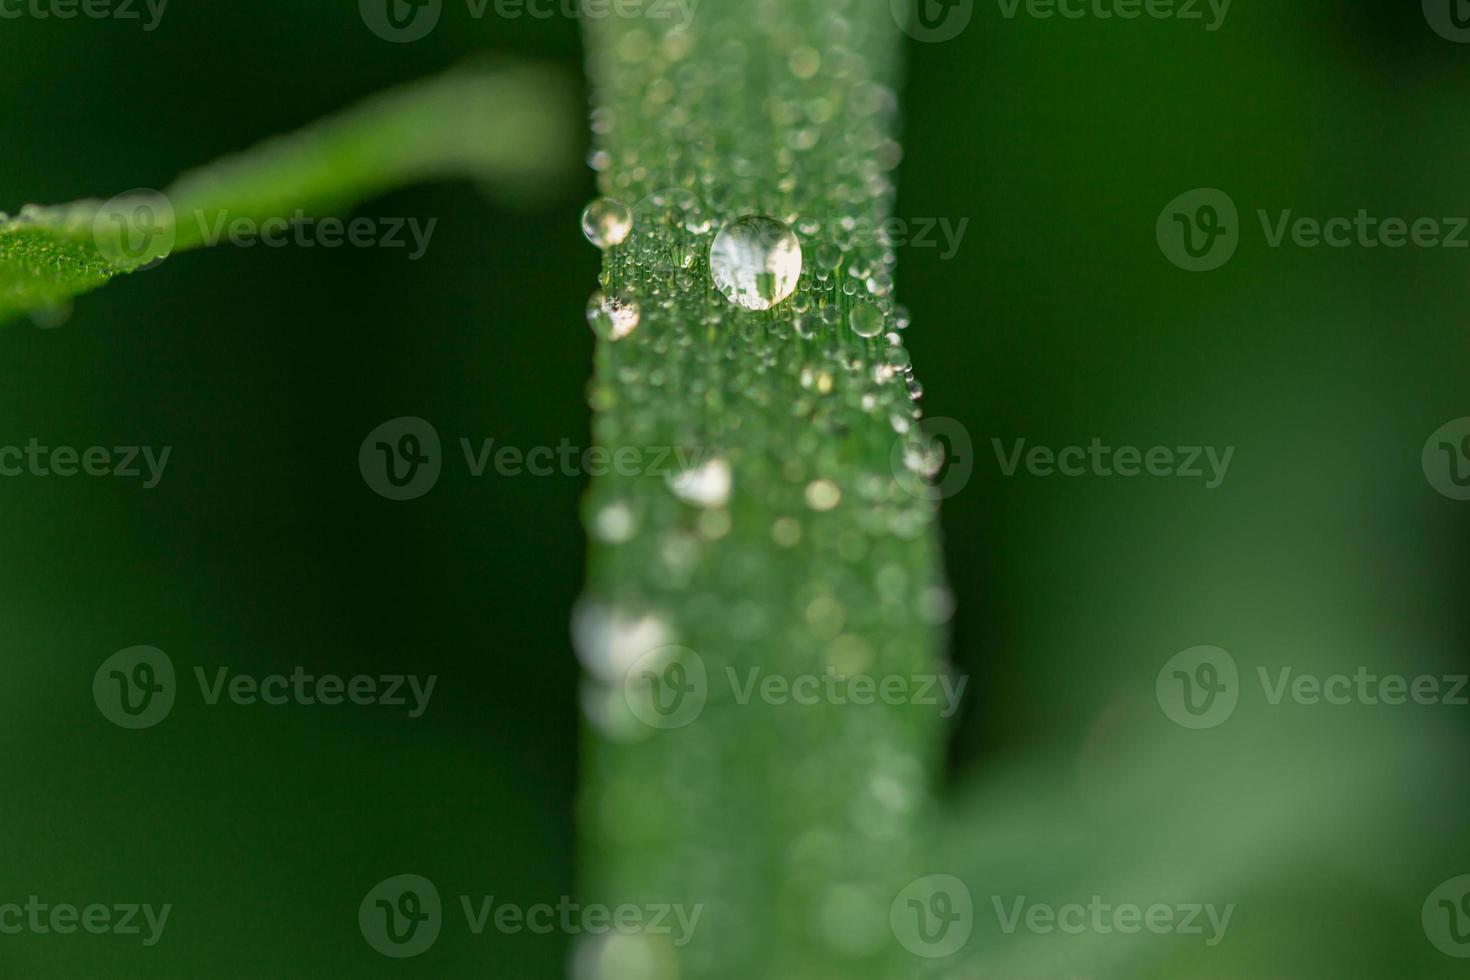 The freshness that comes from the dew on the rice leaves on the new morning photo